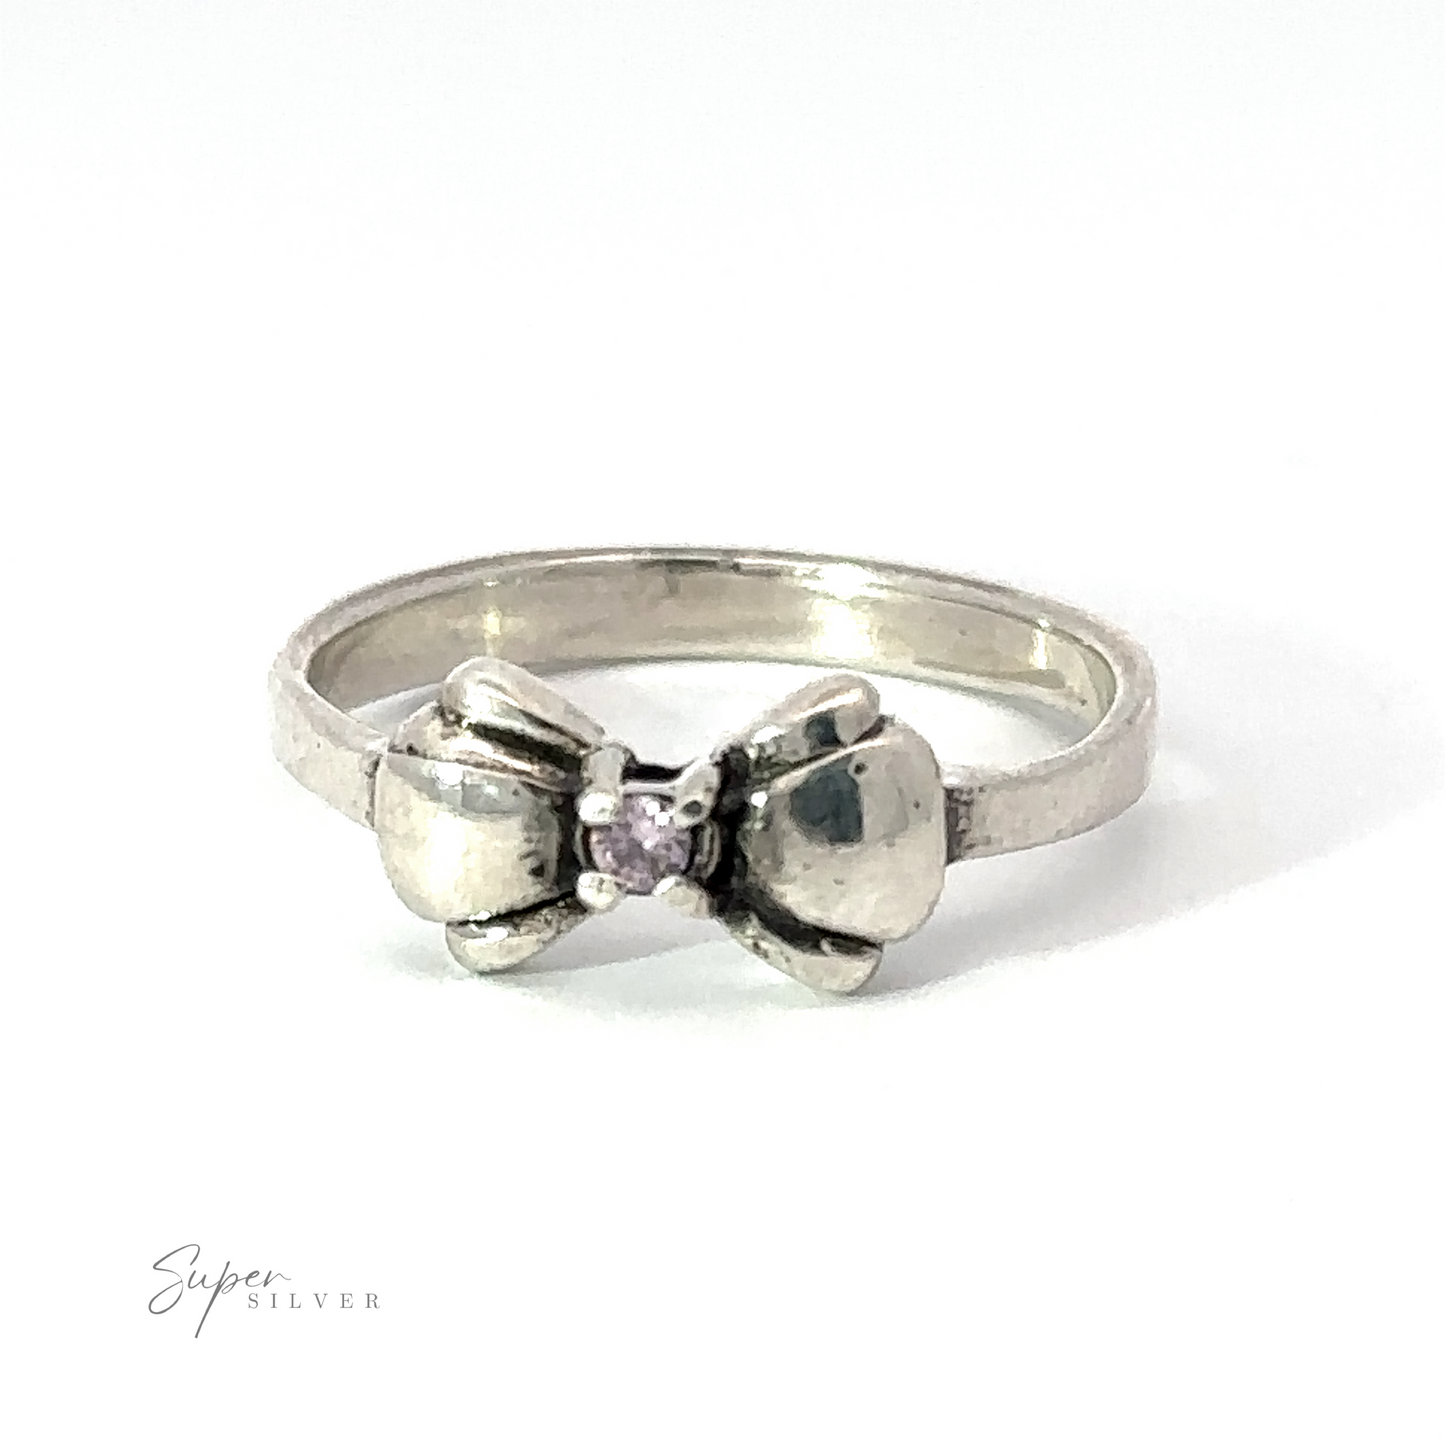 
                  
                    A sterling silver Adorable Cubic Zirconia Bow Ring featuring a small central black cubic zirconia, designed with two bow-like shapes on either side of the stone. Text in the corner reads "Super Silver.
                  
                